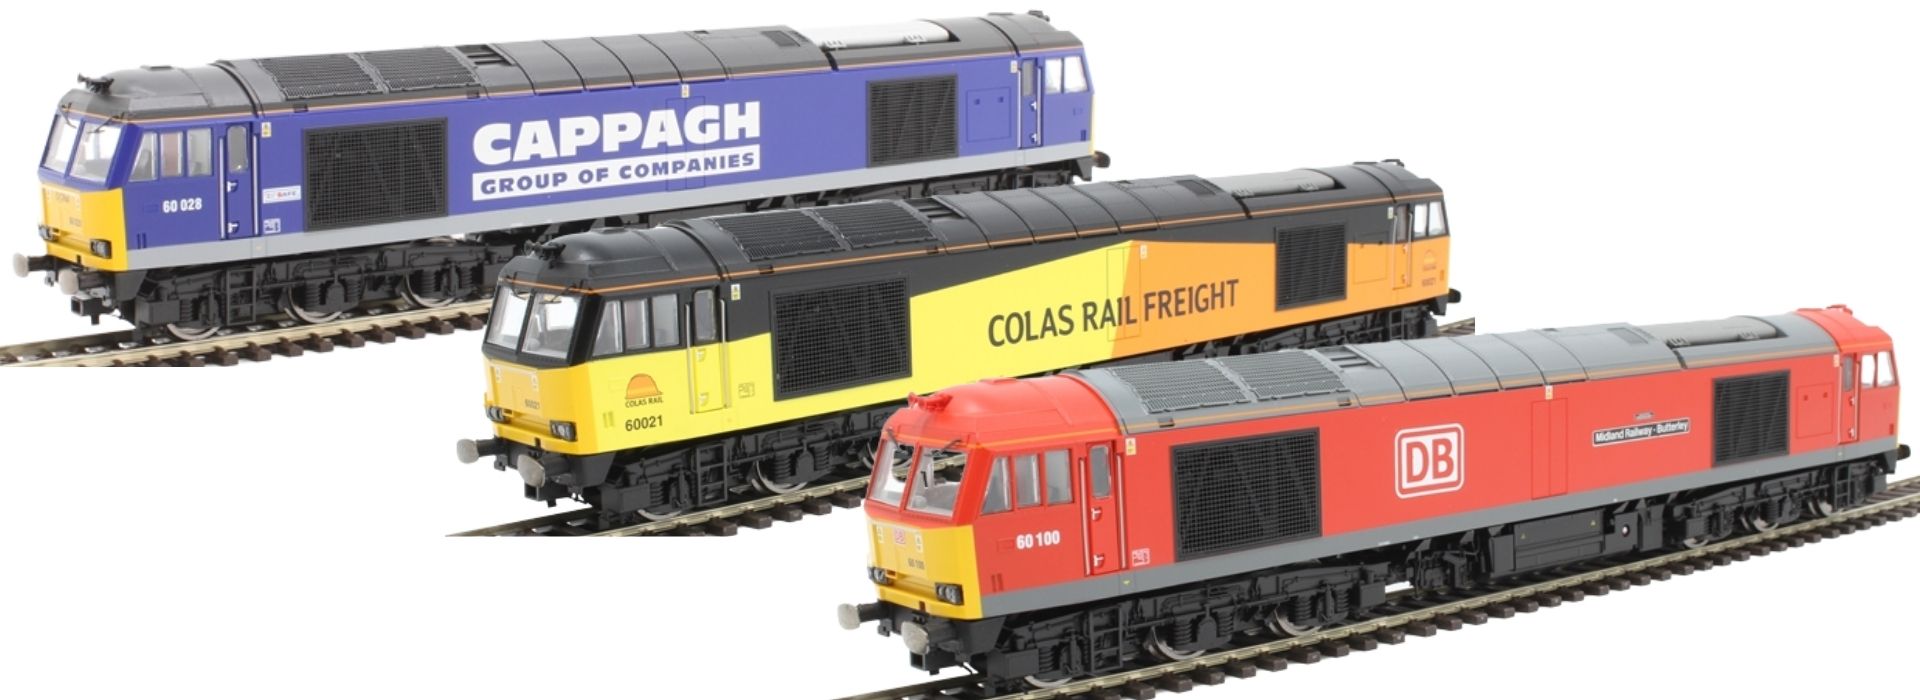 Cappagh, Colas and DB liveried Hornby Class 60s